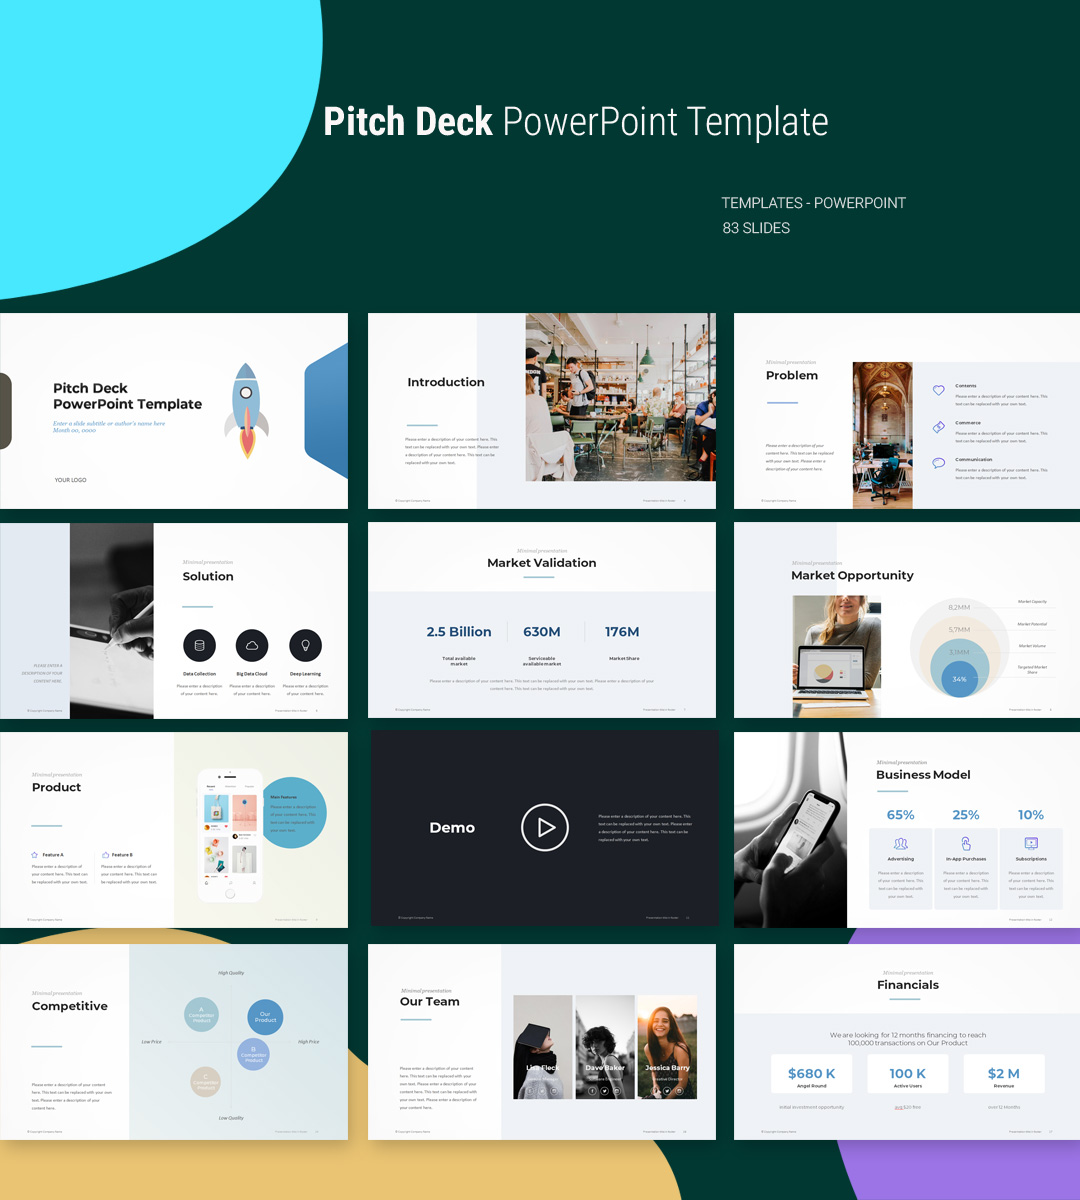 Pitch Deck PowerPoint Template PPTWear Download PPT